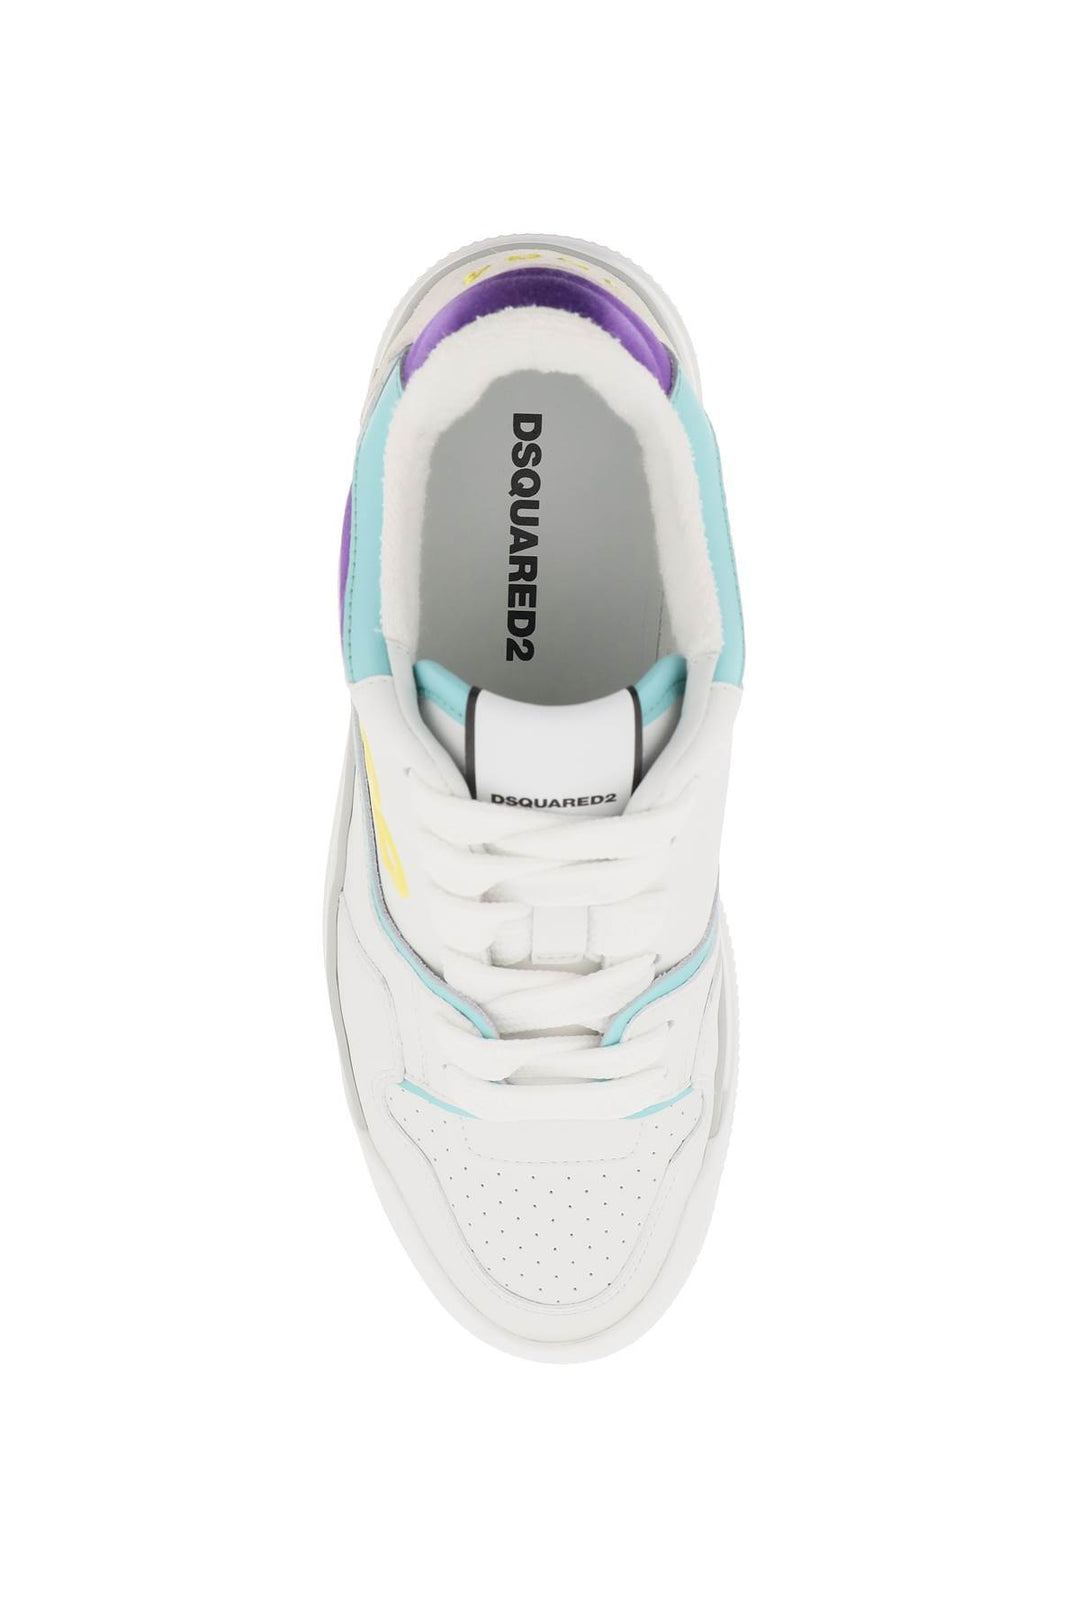 Dsquared2 smooth leather new jersey sneakers in 9-1